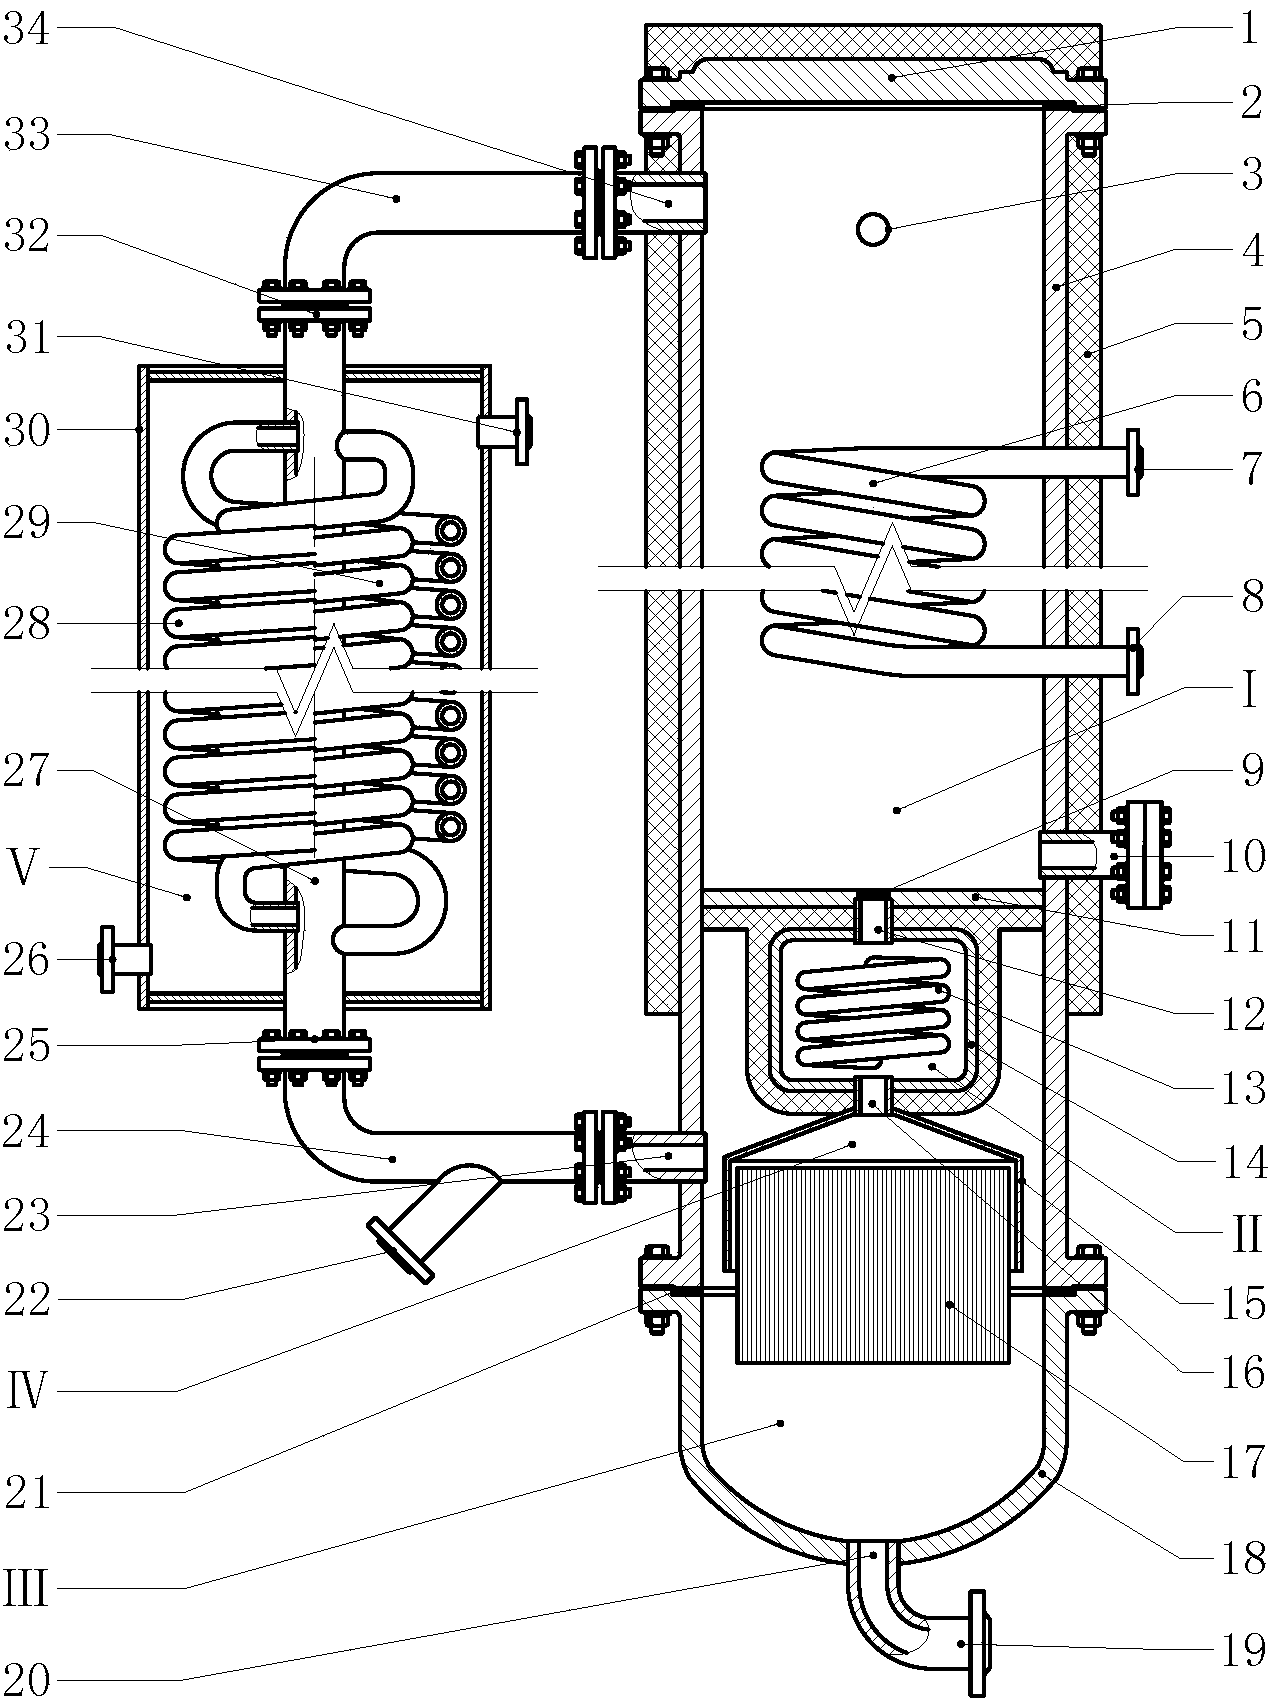 Split self-circulation chemical synthesizer